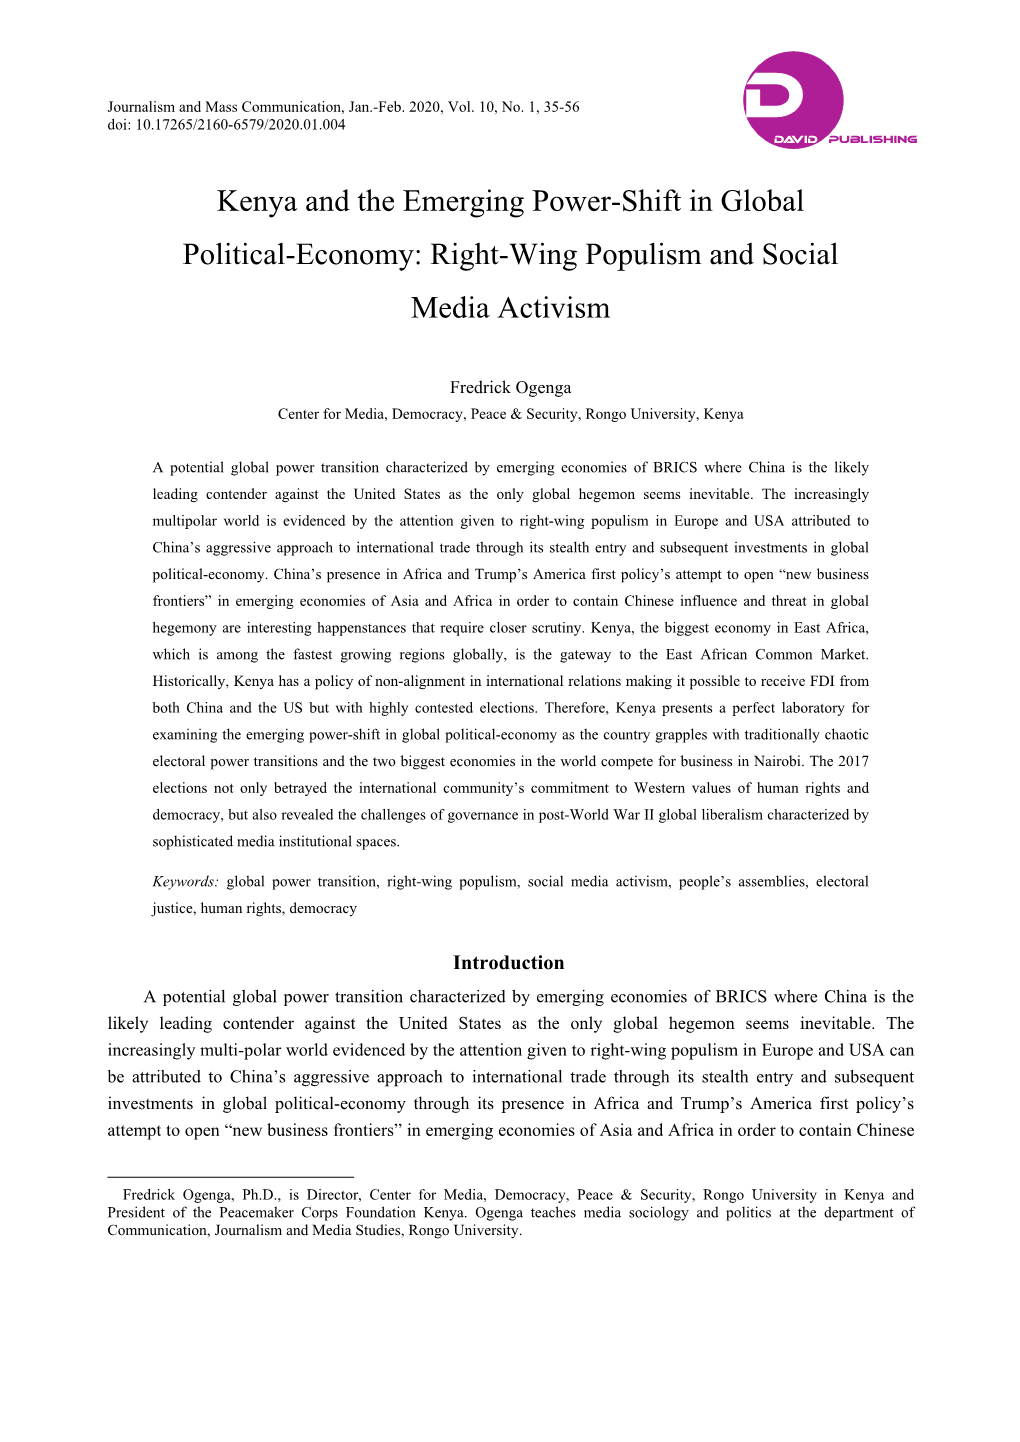 Kenya and the Emerging Power-Shift in Global Political-Economy: Right-Wing Populism and Social Media Activism